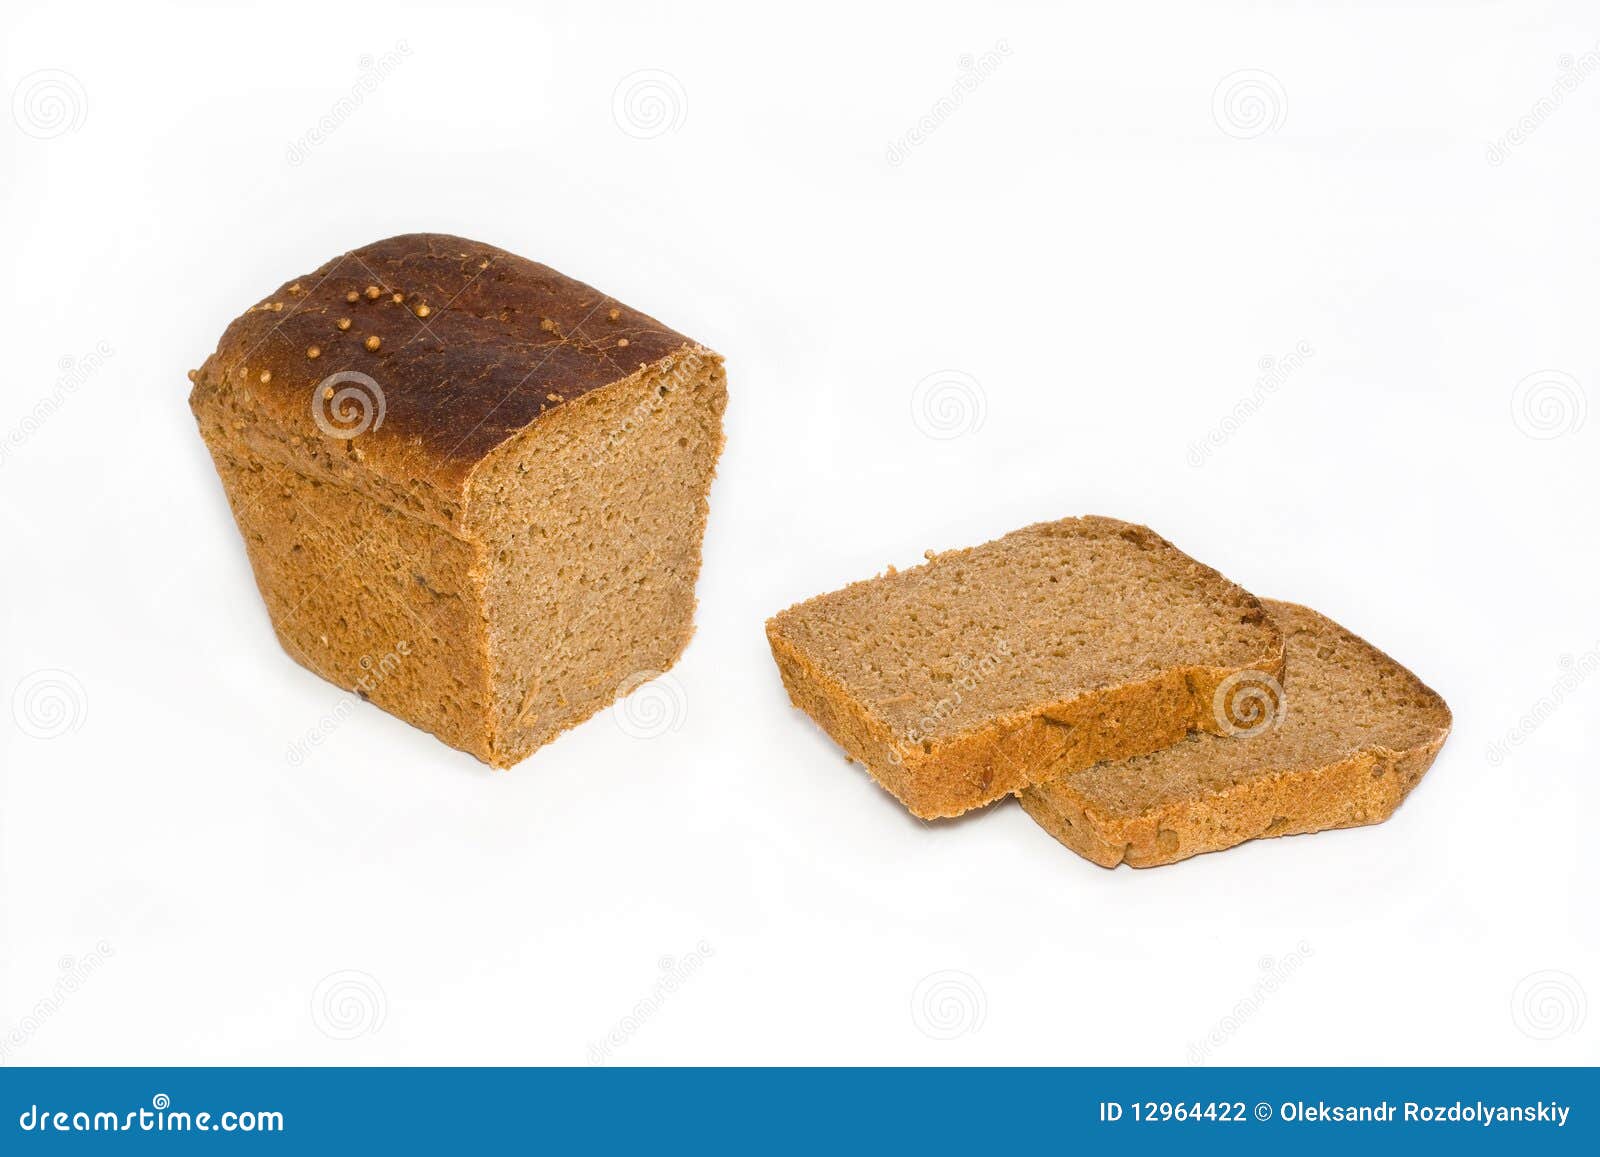 Rye bread is cut on a white background